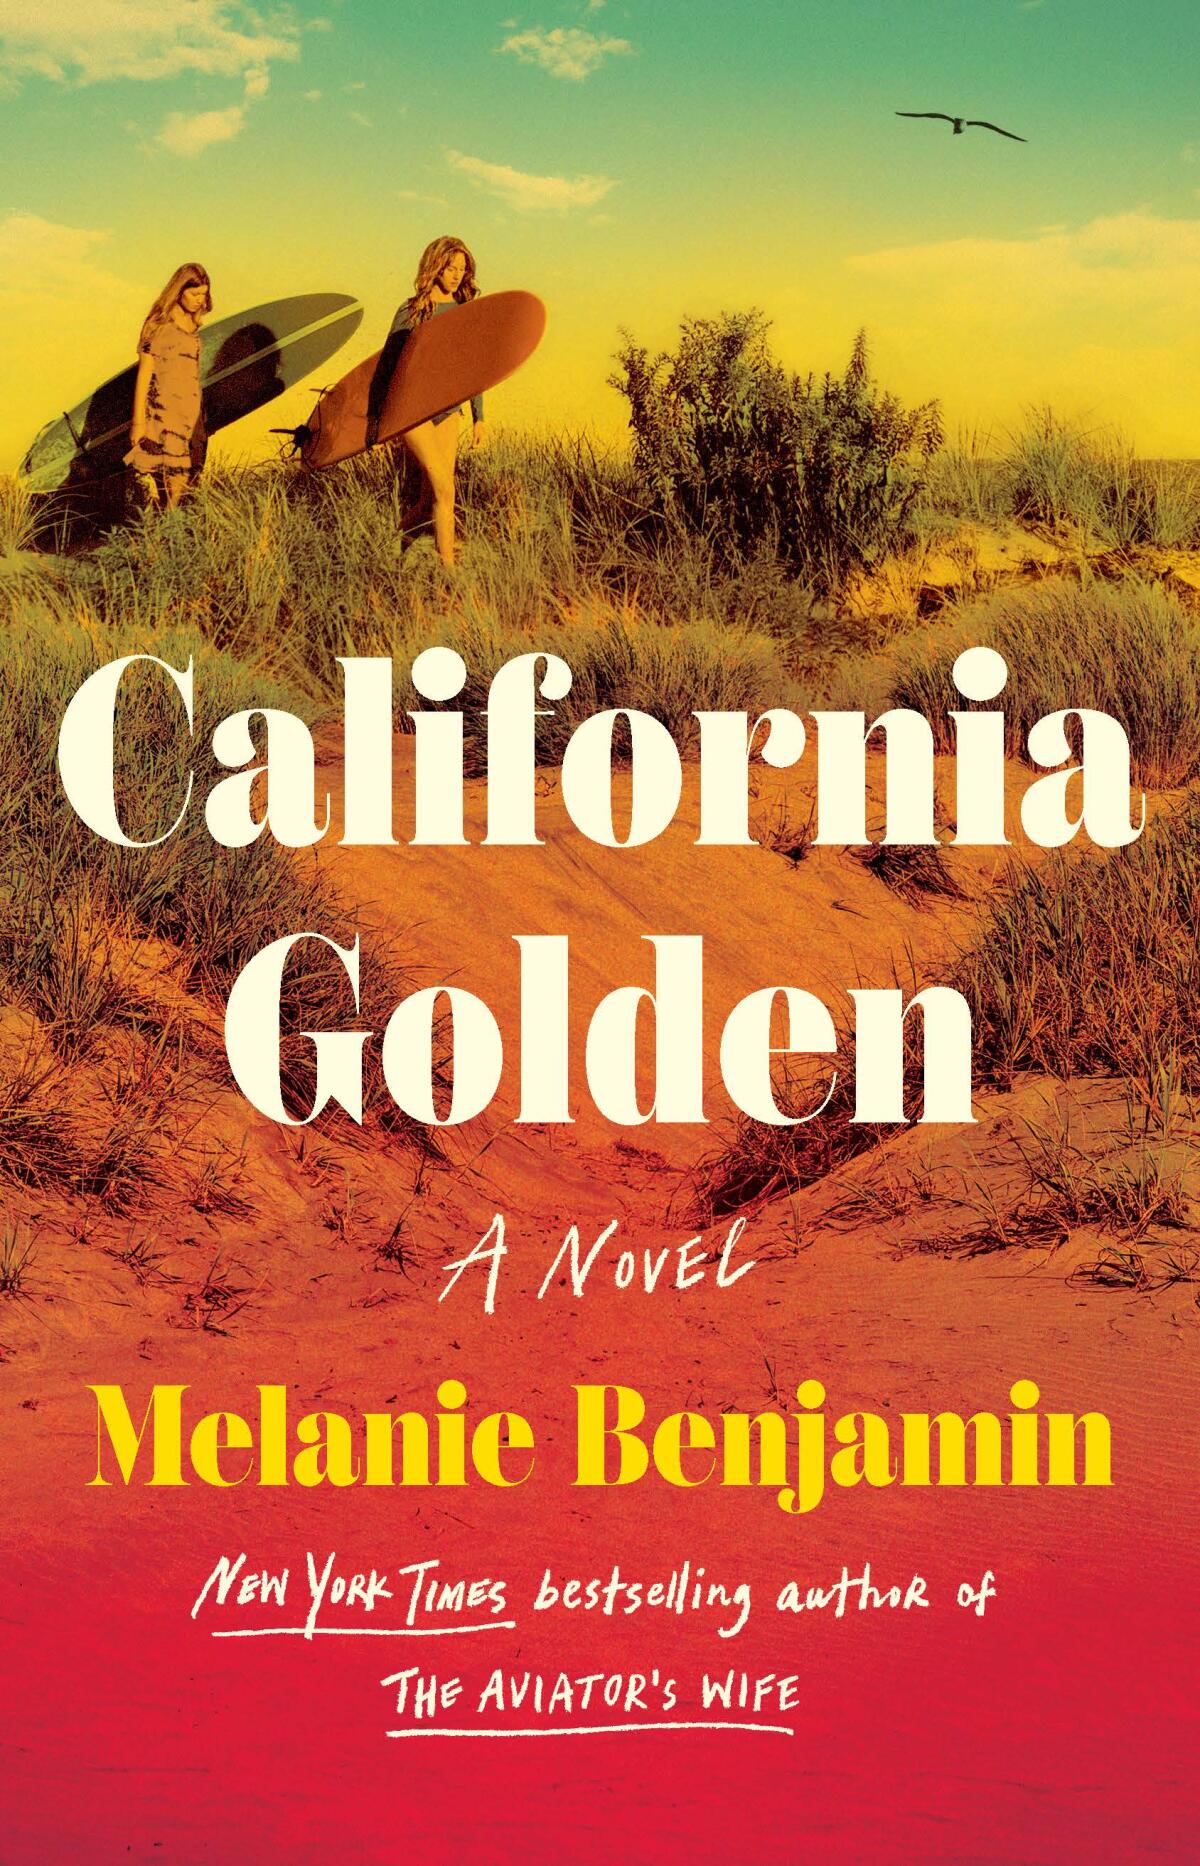 The cover of "California Golden" by Melanie Benjamin features two young women carrying surfboards on the sand.